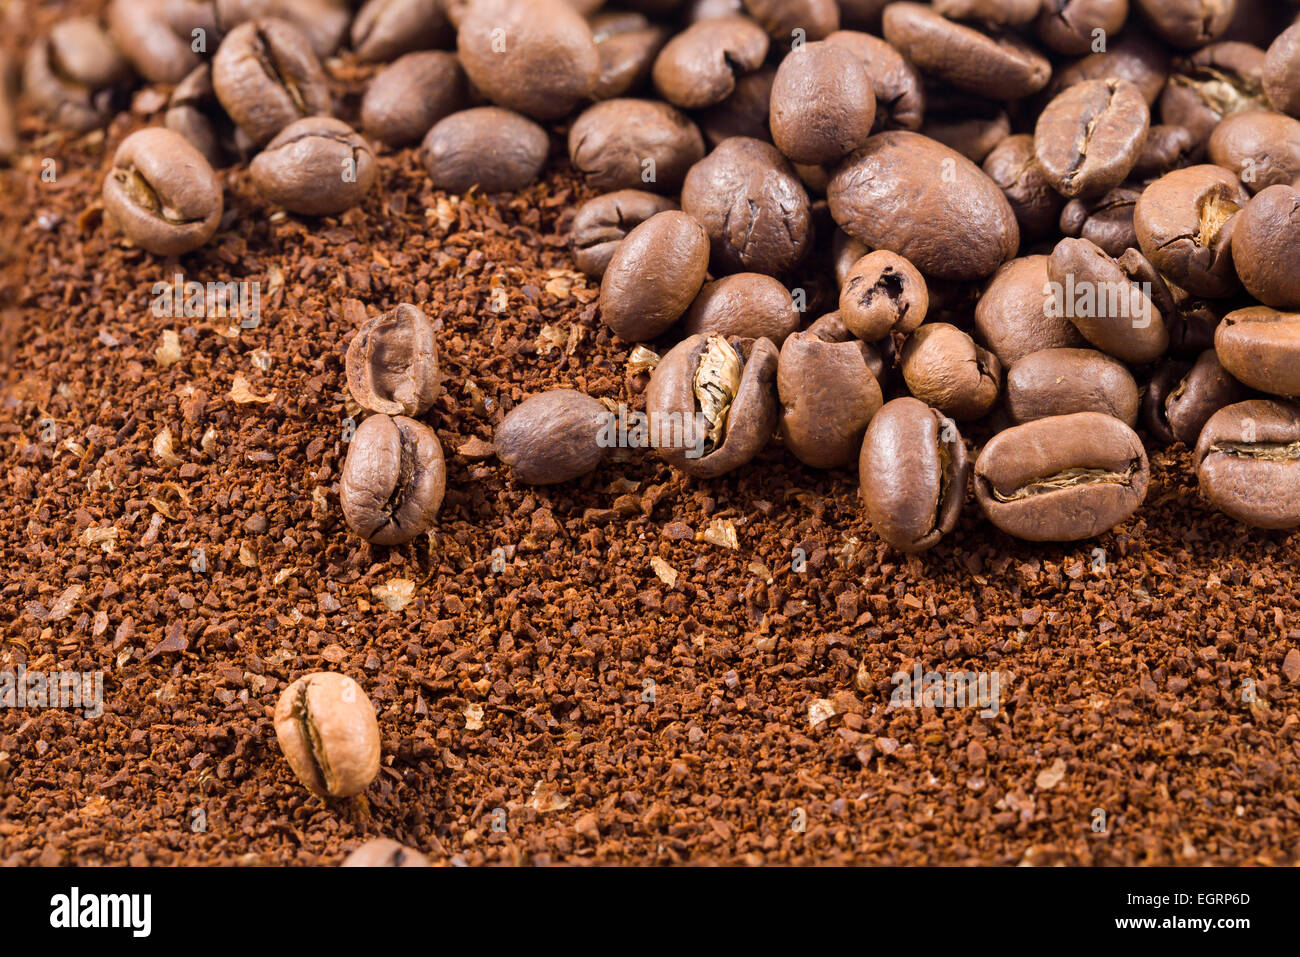 Picture of a group of coffee beans with coffee powder Stock Photo